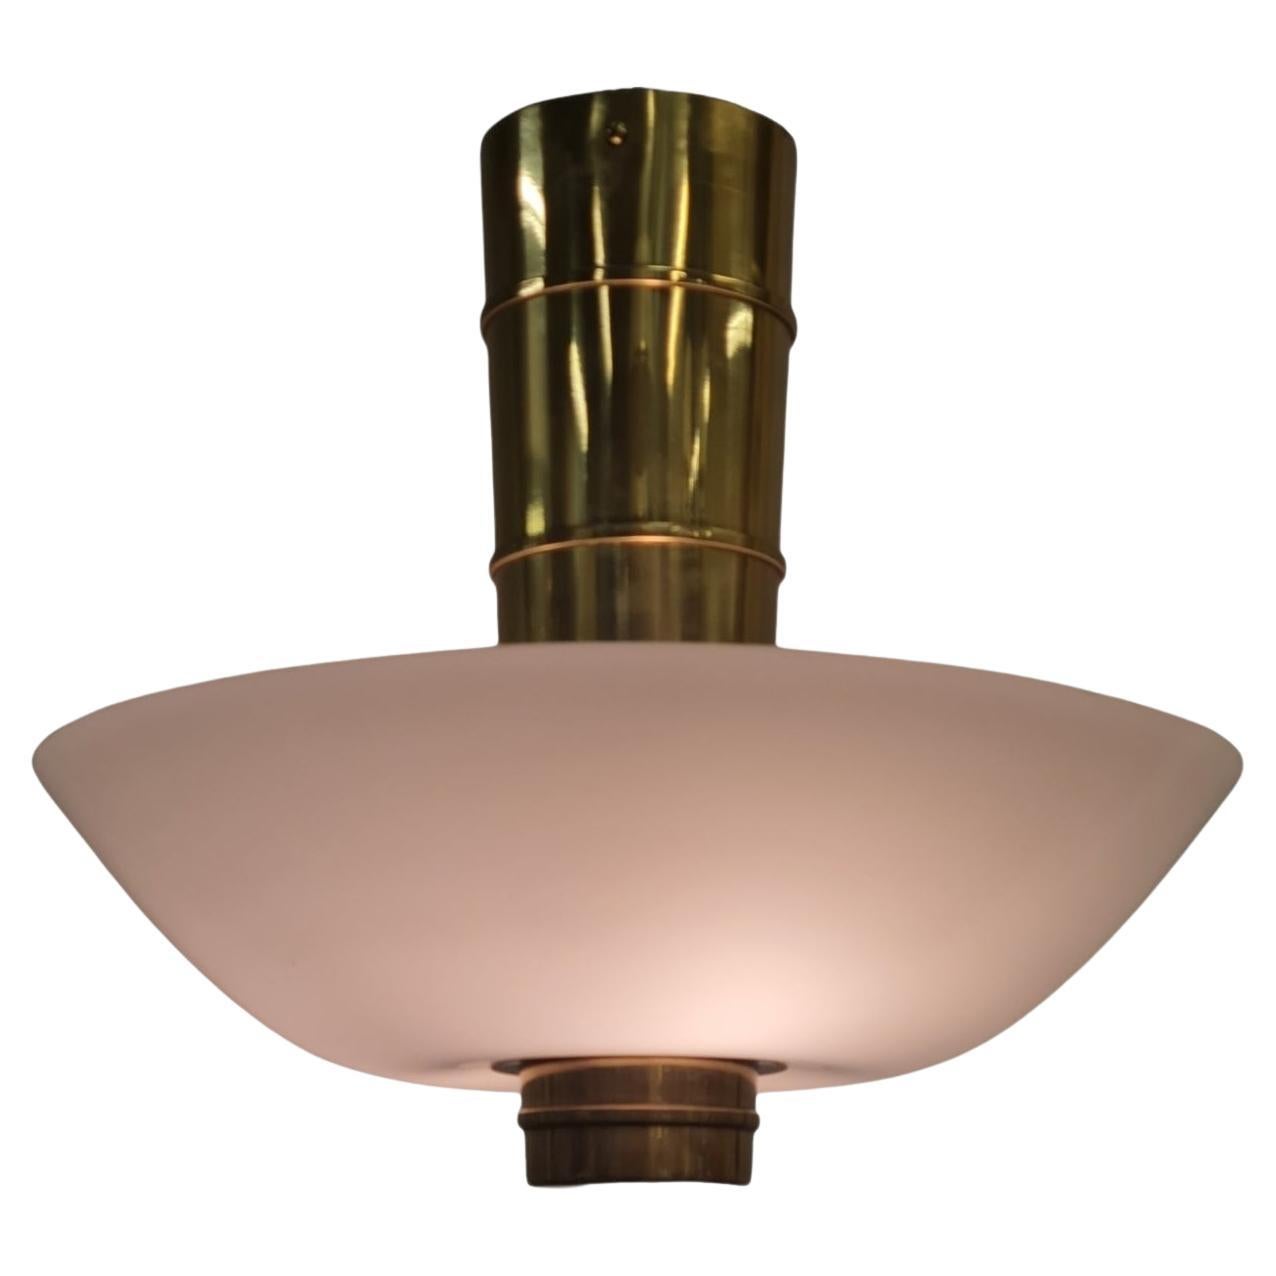 Paavo Tynell ceiling lamp model no. 9053 For Sale